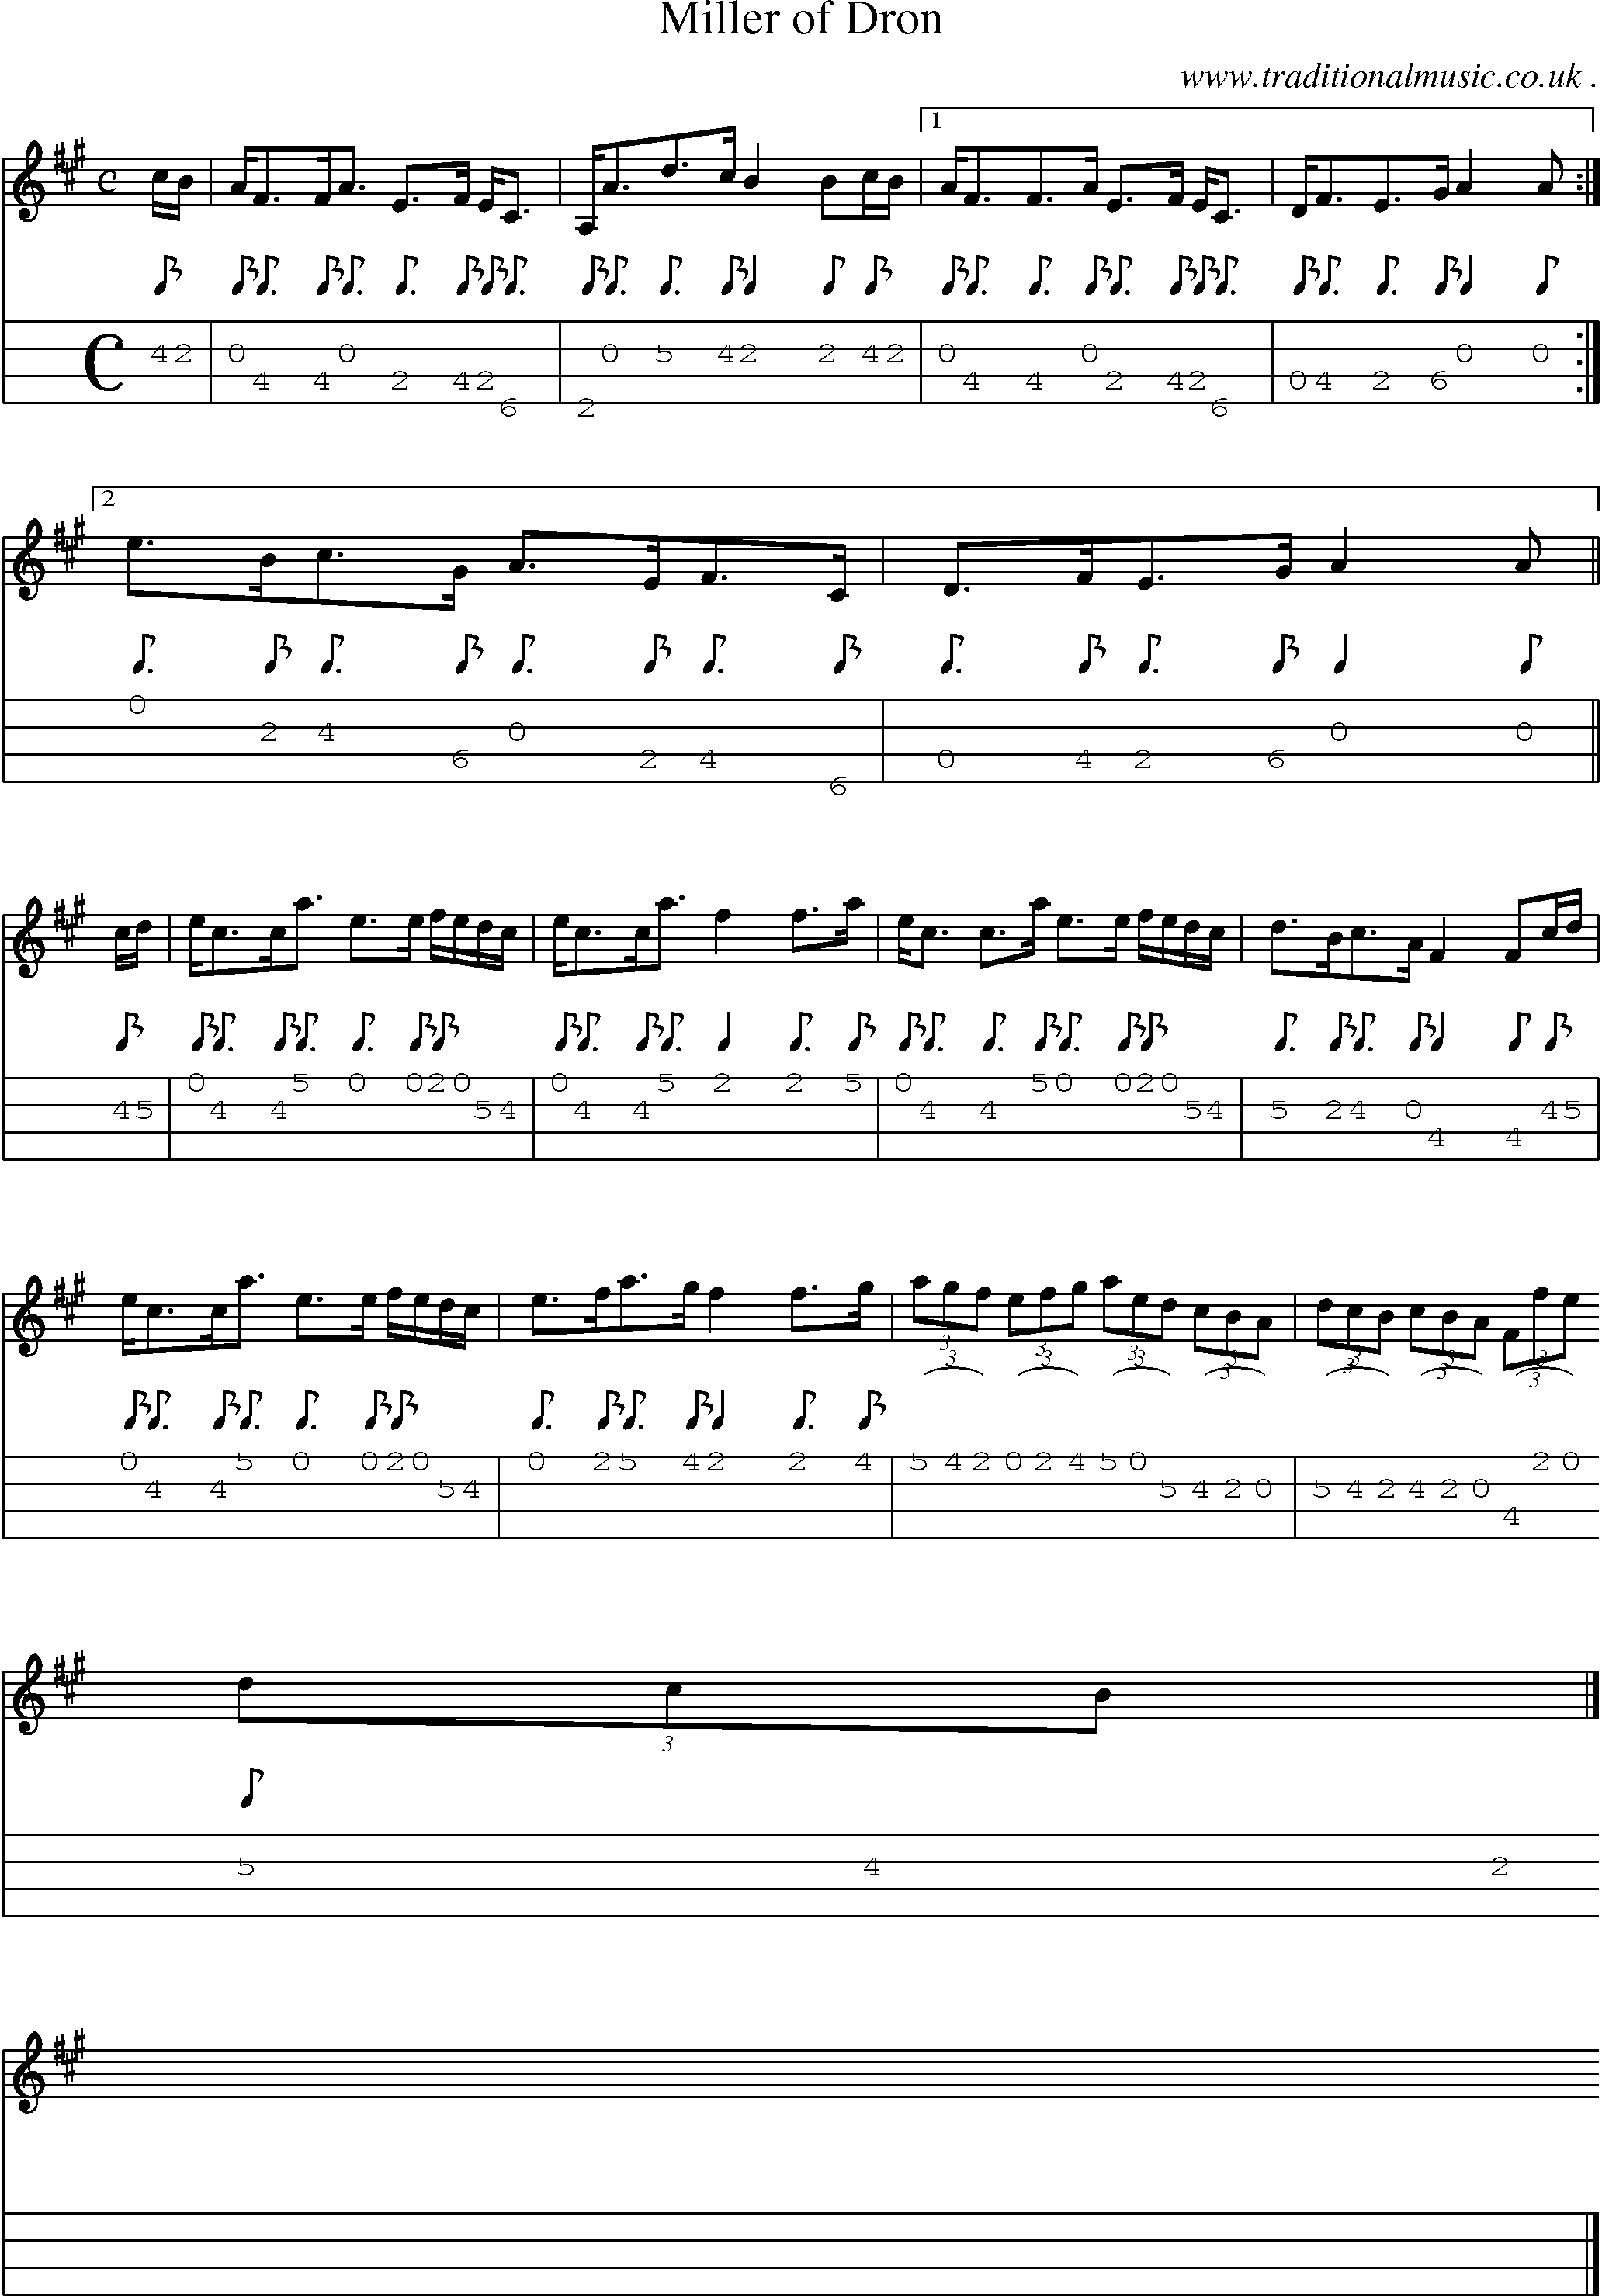 Sheet-music  score, Chords and Mandolin Tabs for Miller Of Dron